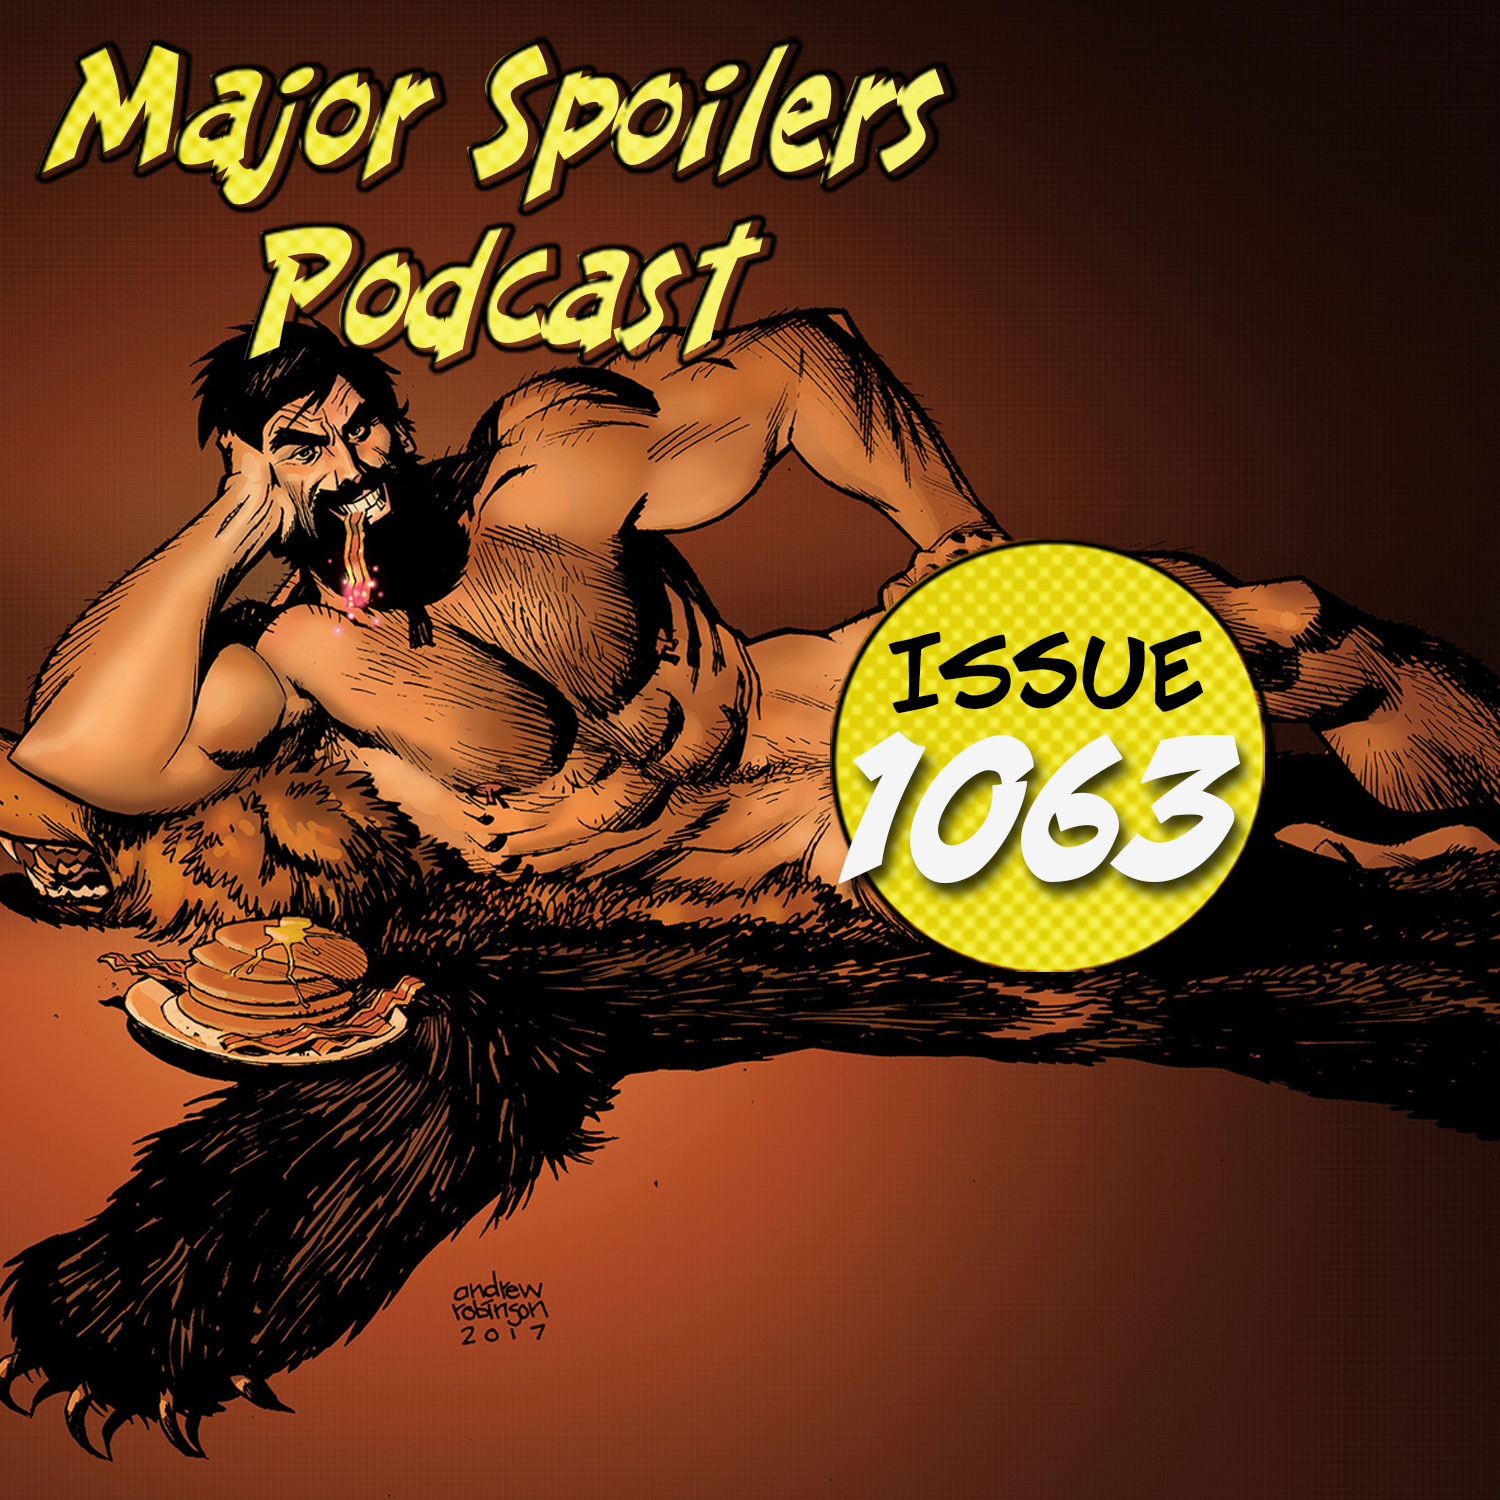 Major Spoilers Podcast #1063: The Shirtless Bear Podcast